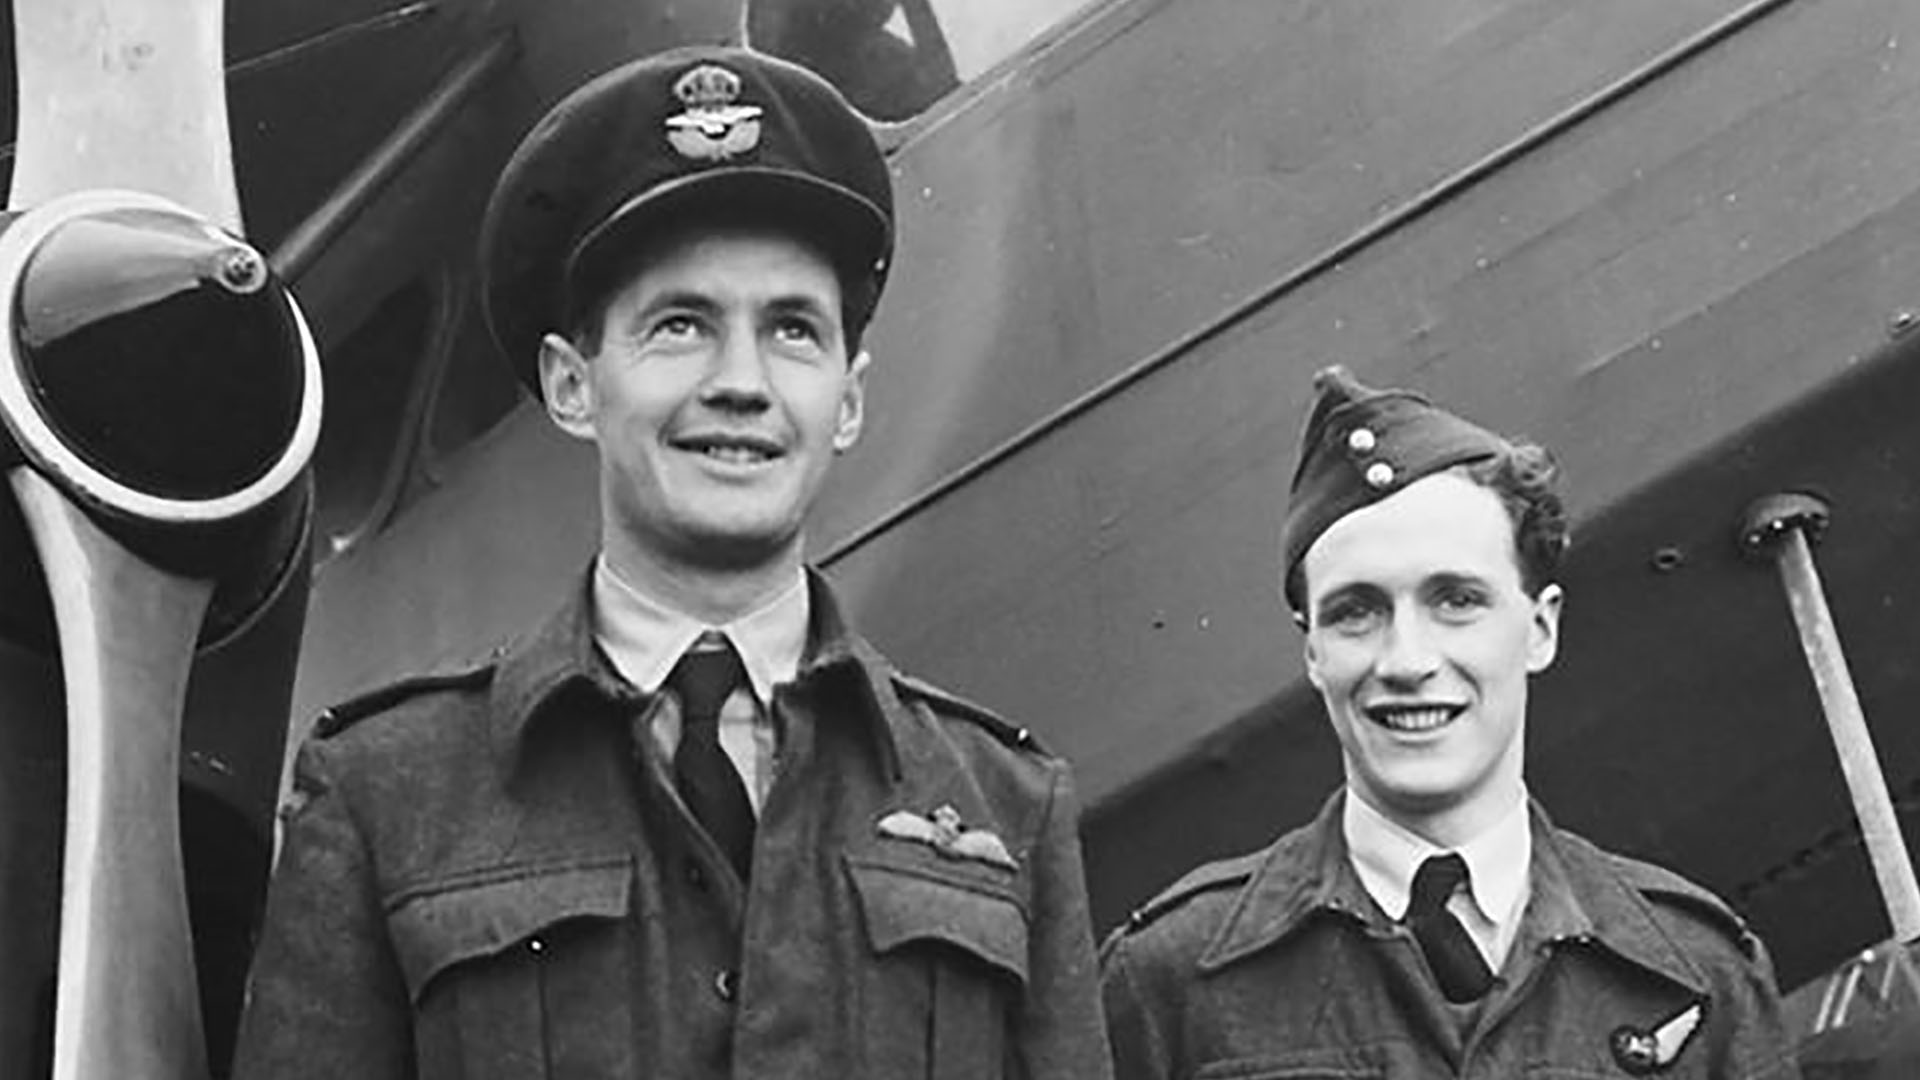 Flight Lieutenant Alexander Appleby of the Royal New Zealand Air Force and Flying Officer J.W. McCullough of Glasgow, Scotland.